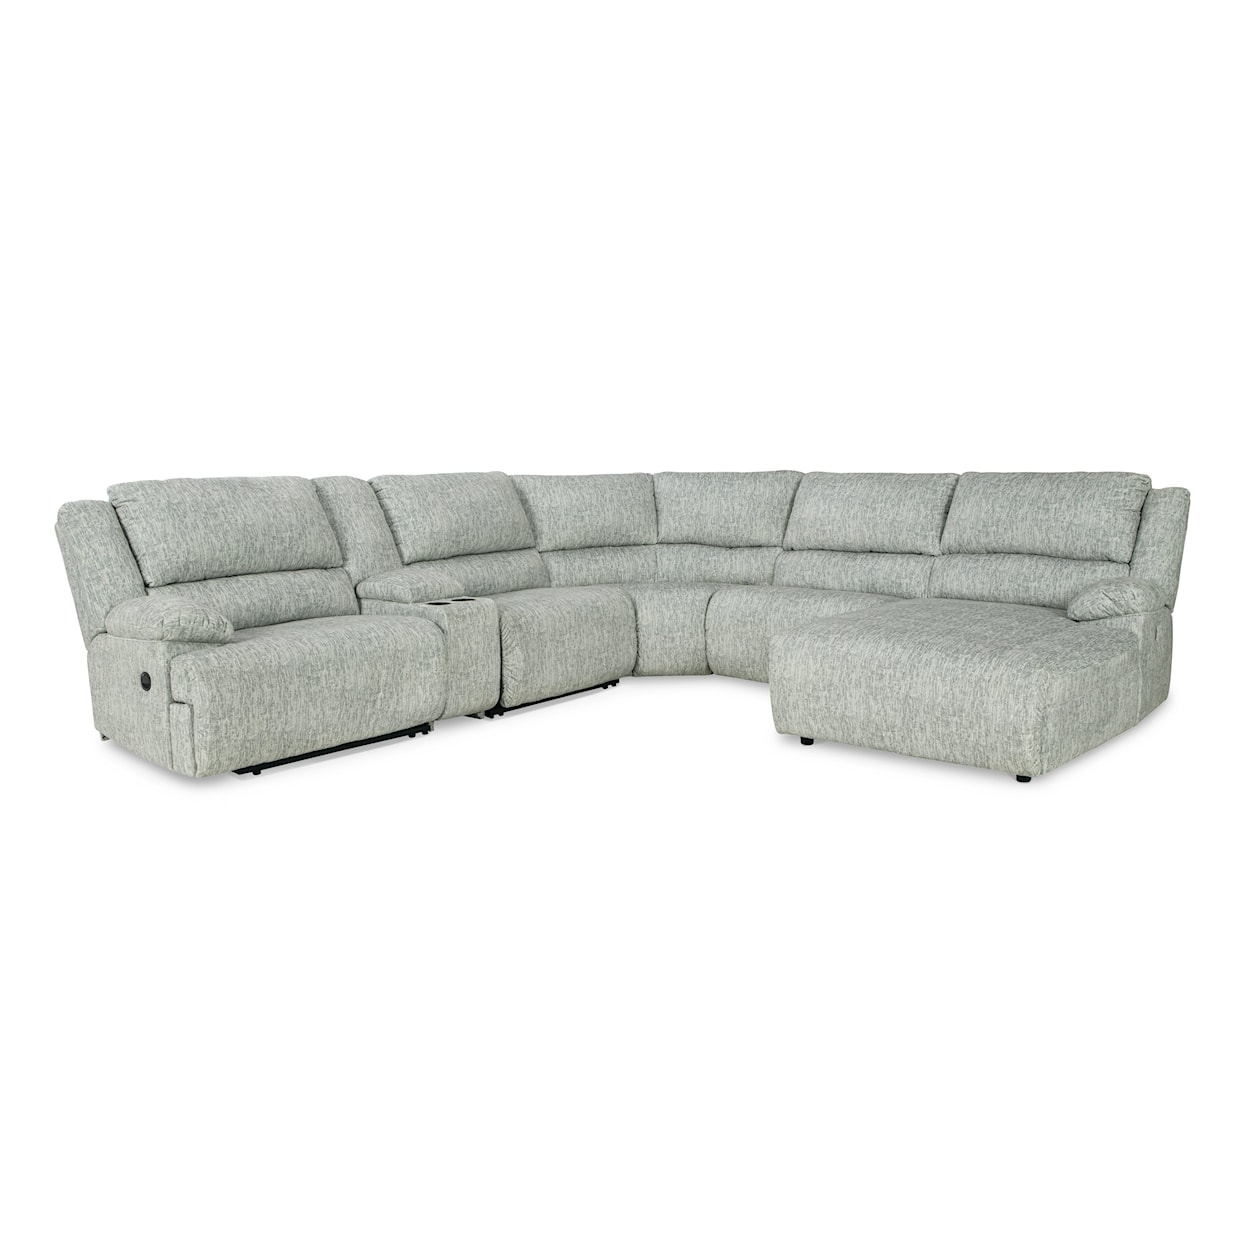 Signature Design by Ashley Furniture McClelland 6-Piece Reclining Sectional with Chaise